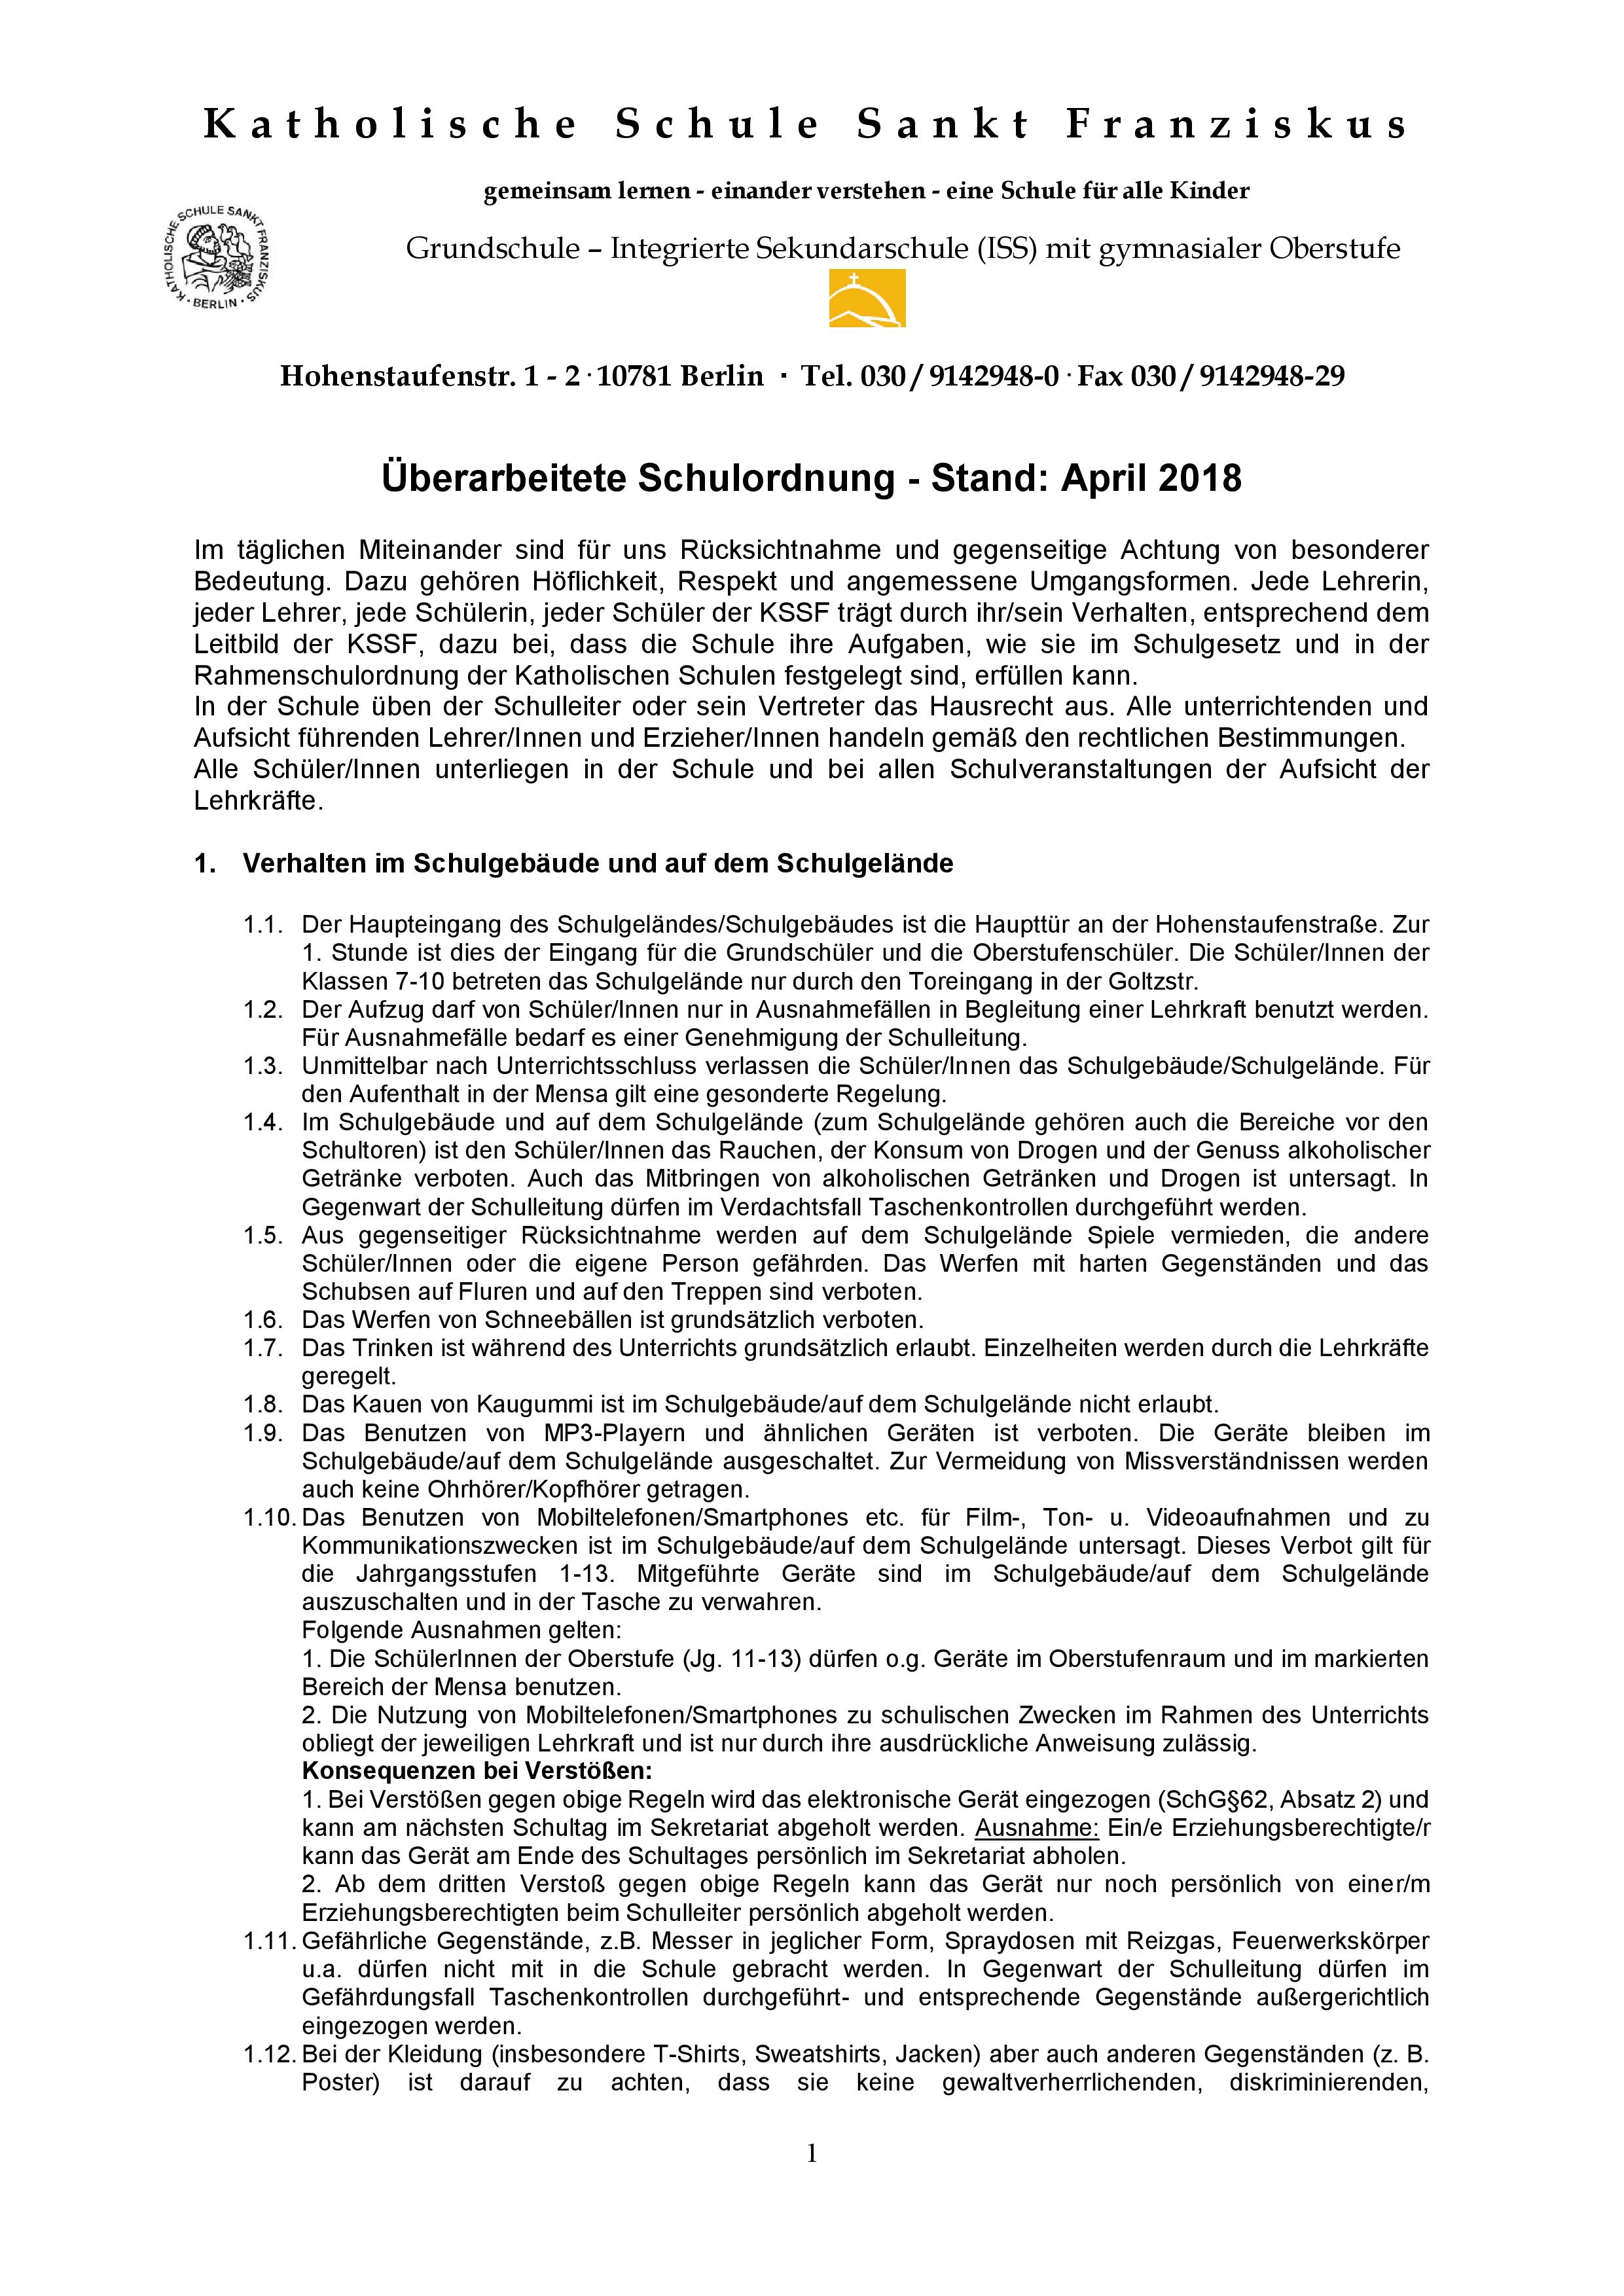 Schulordnung Fassung April 2018-page-001